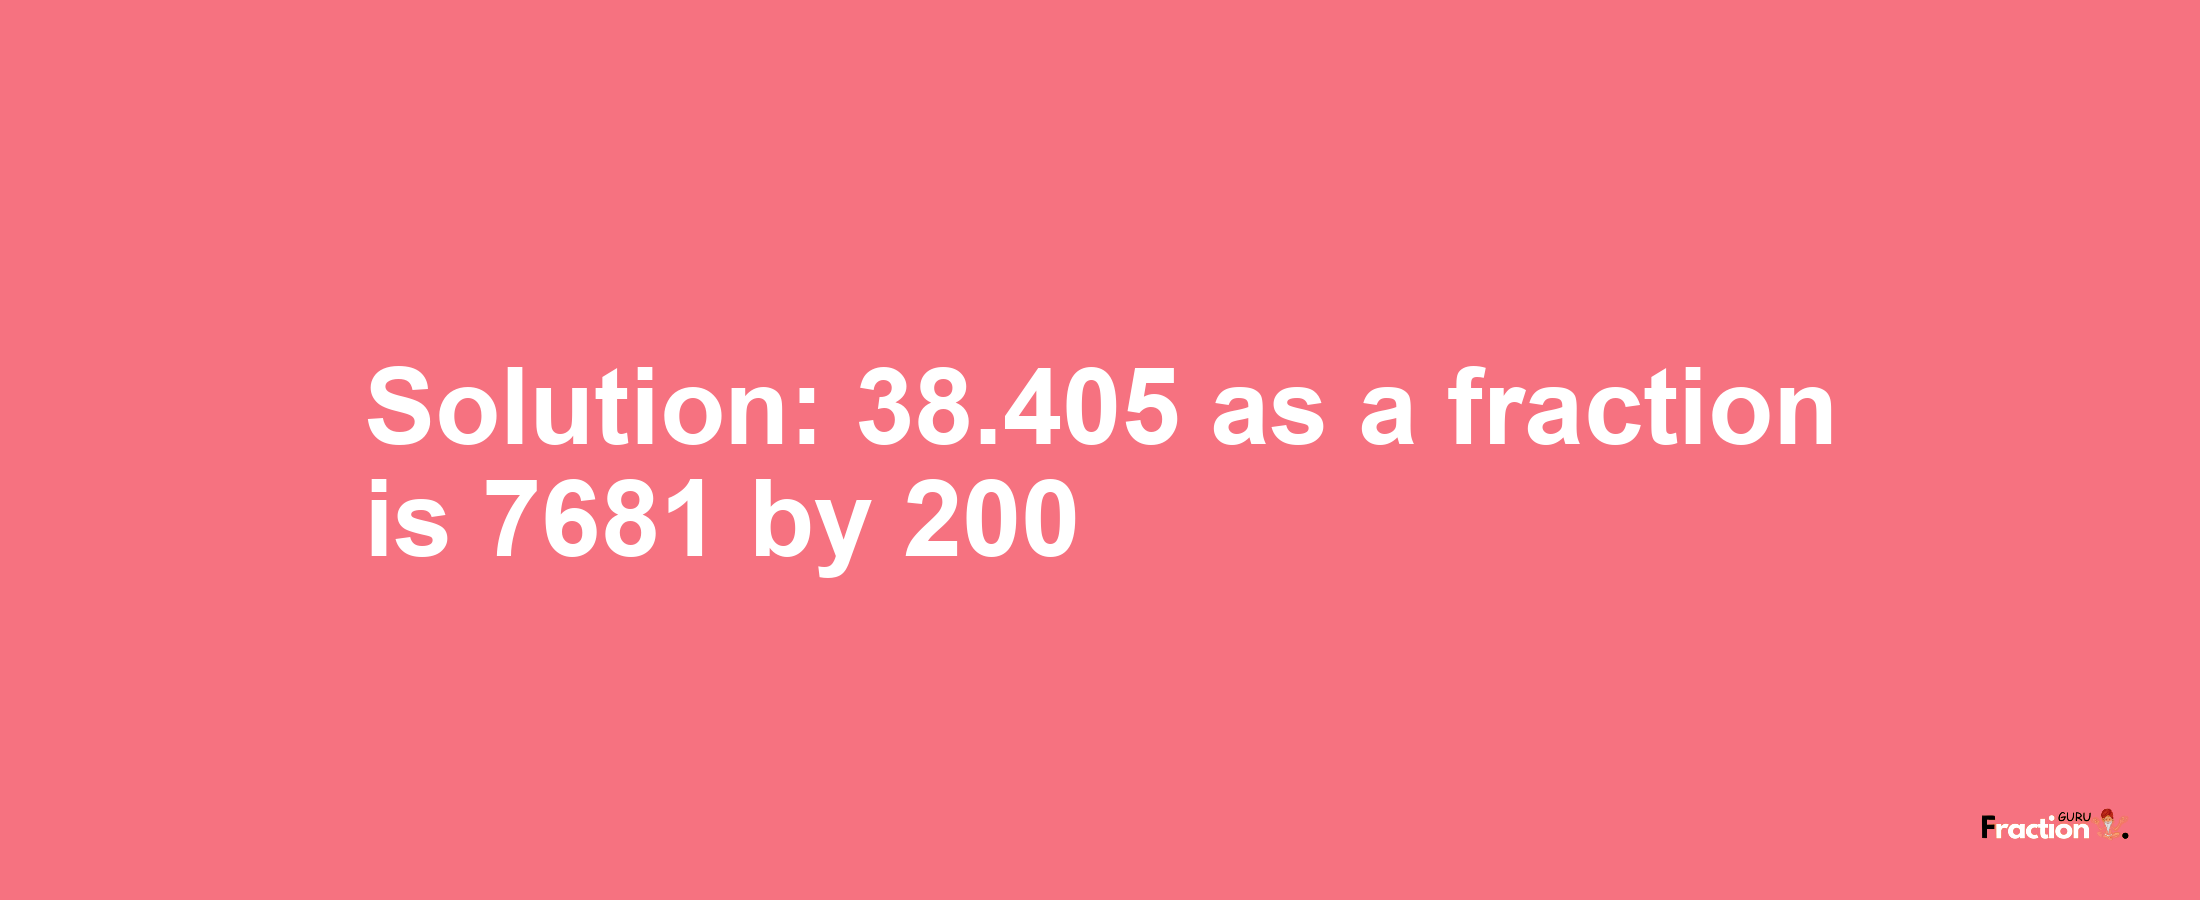 Solution:38.405 as a fraction is 7681/200